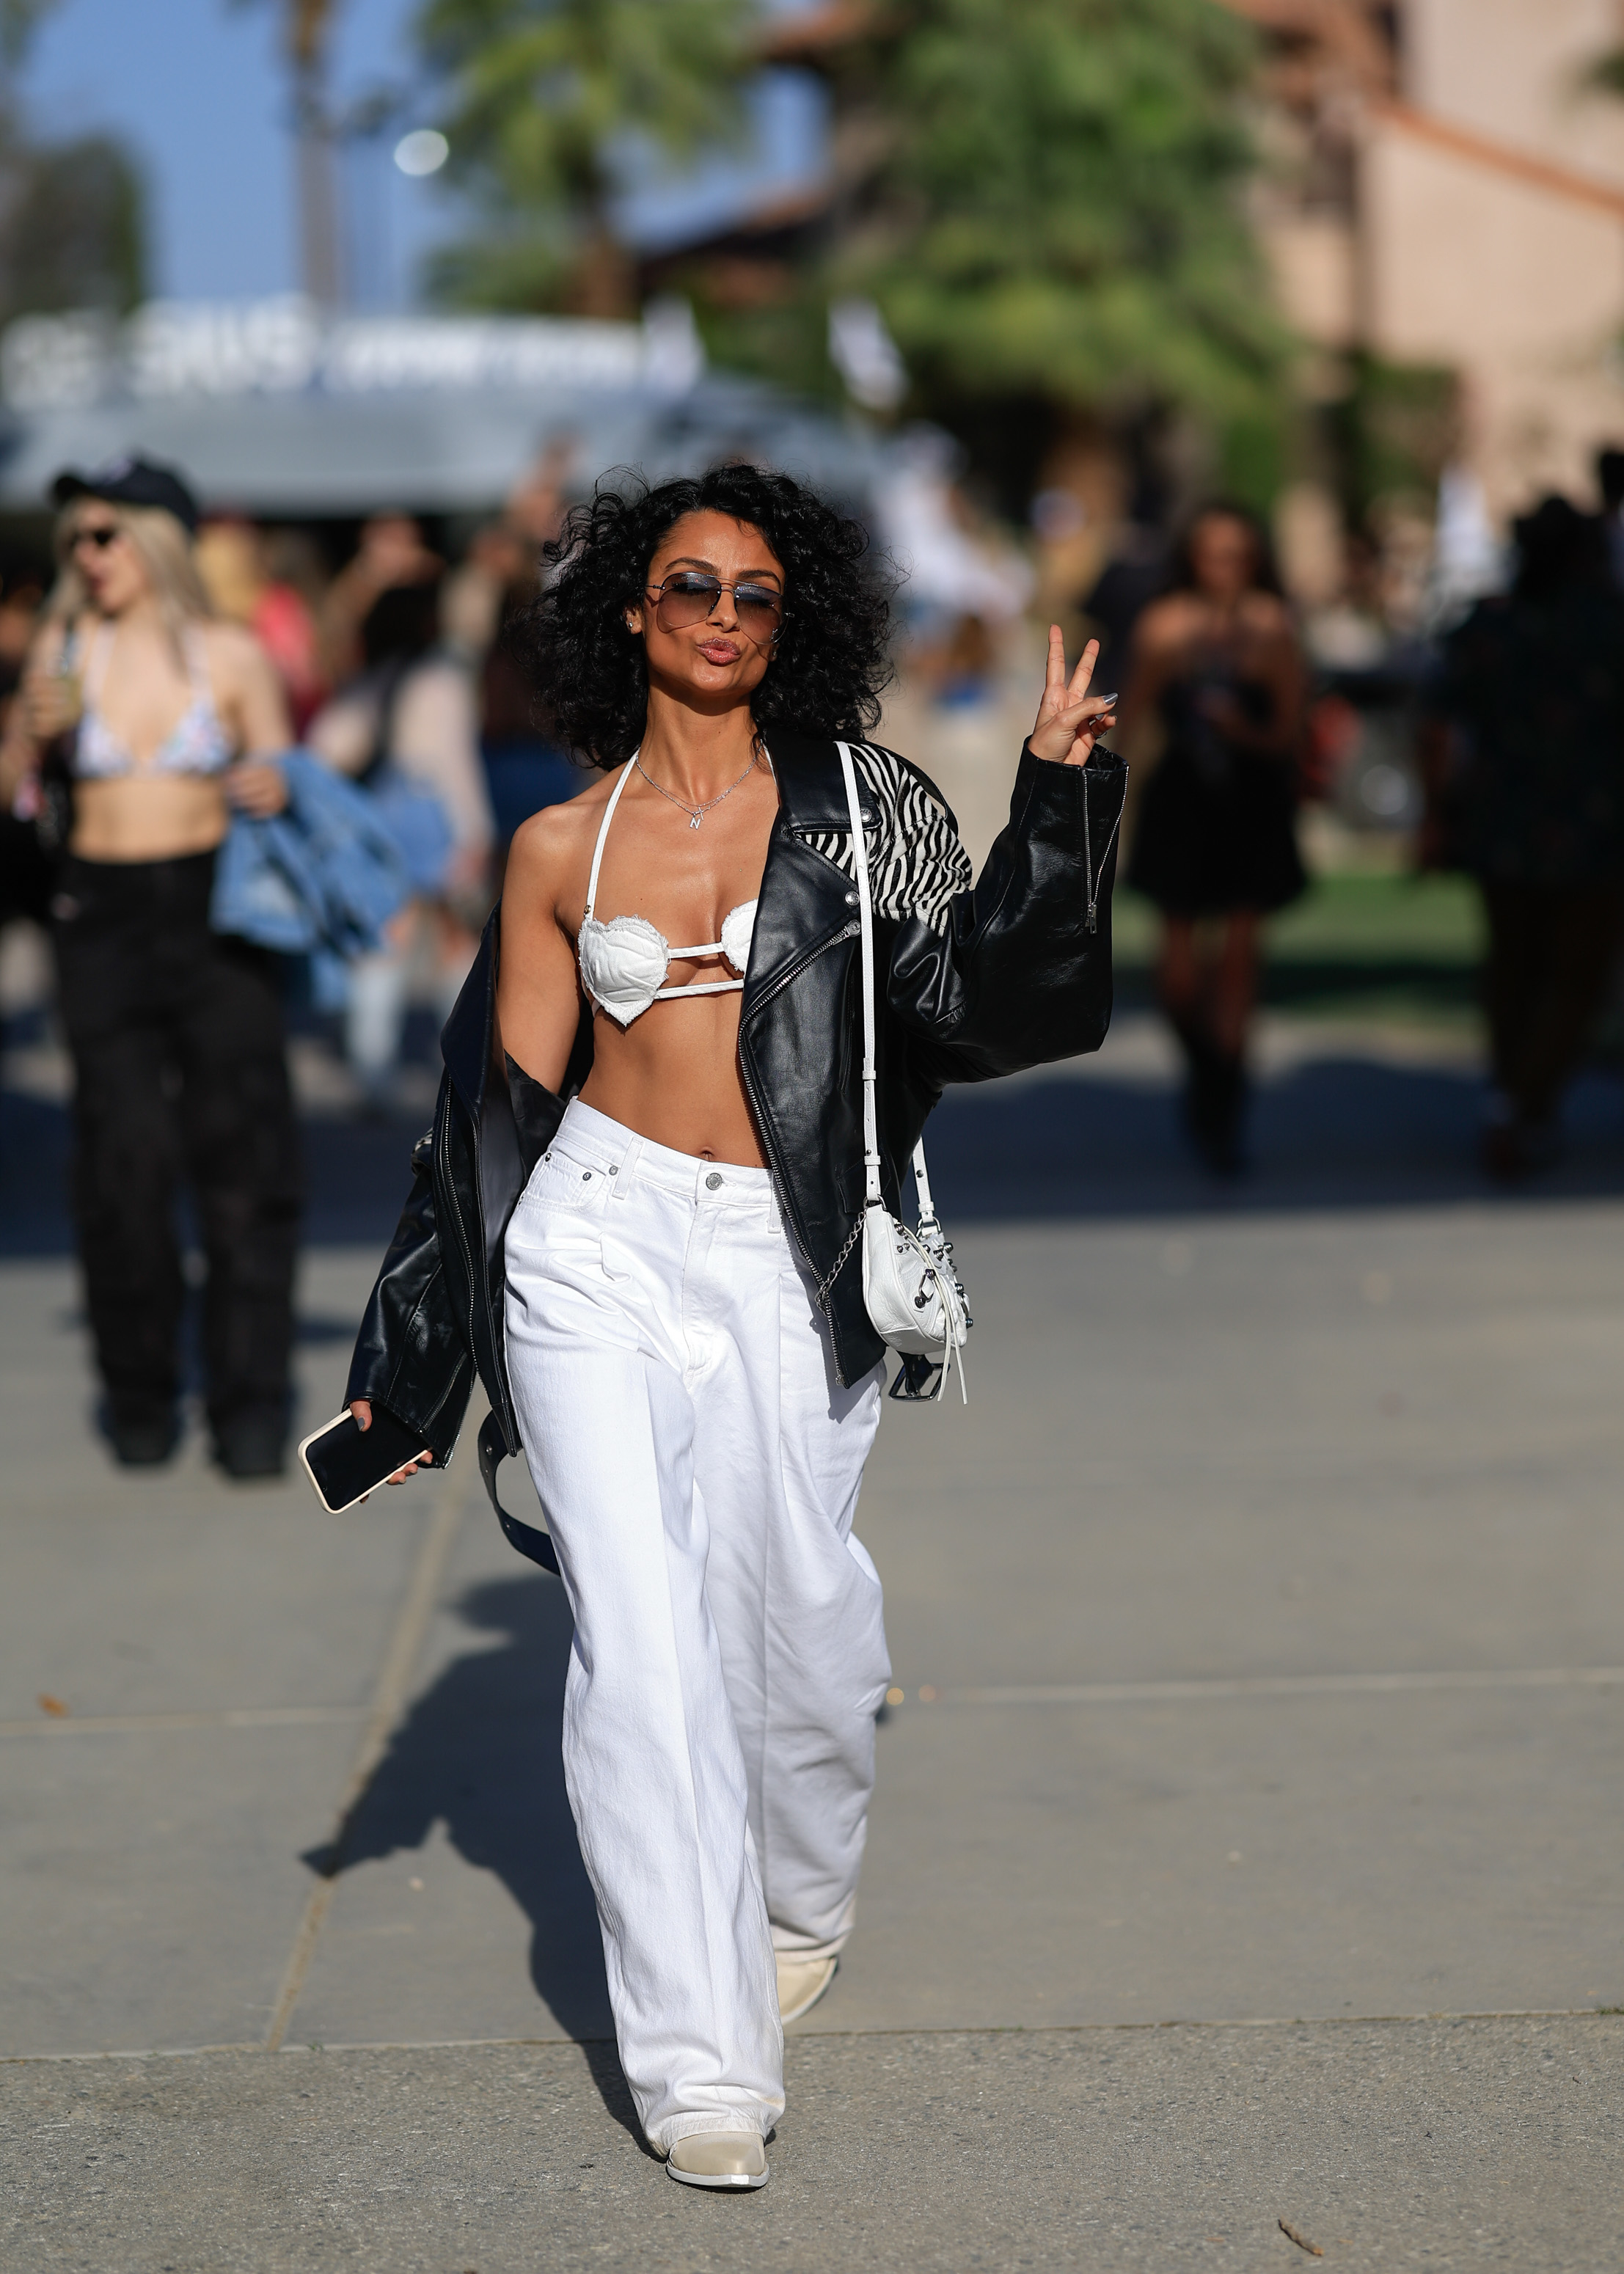 Woman in white pants, bralette, and black jacket makes peace sign, walking outdoors